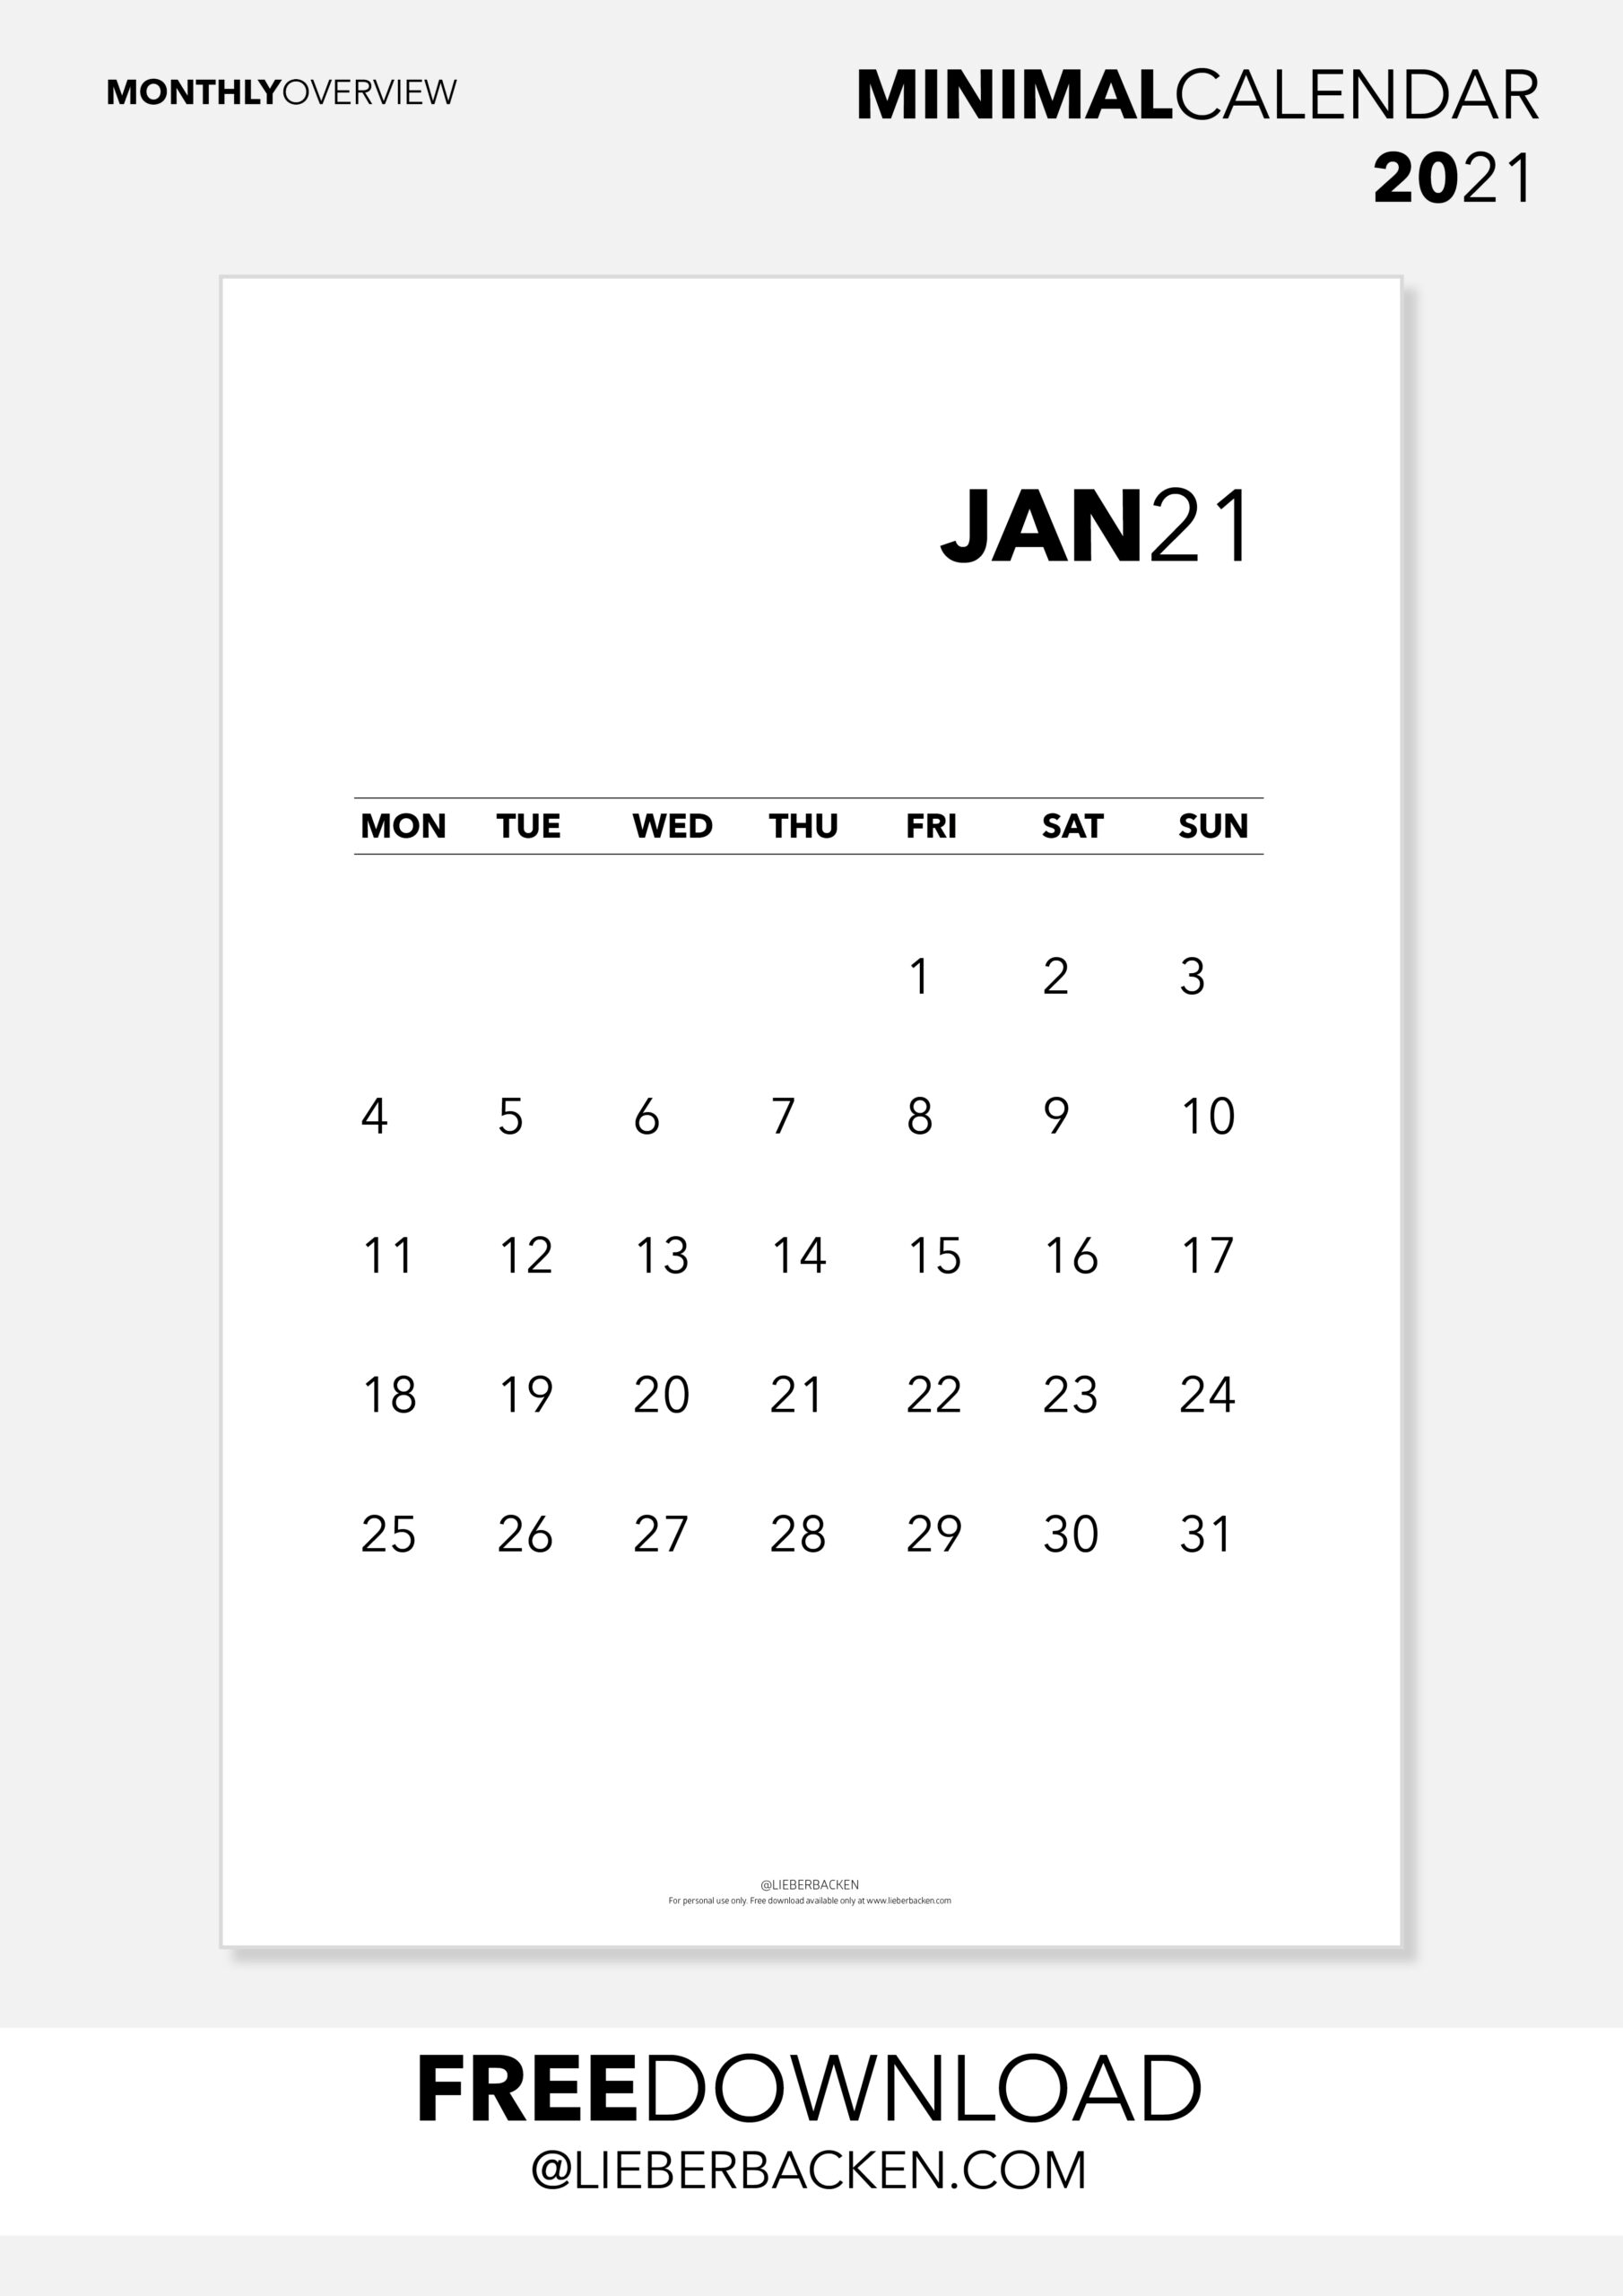 FREE DOWNLOAD: Monthly Overview | Minimal Calendar 2021 | #freepintables